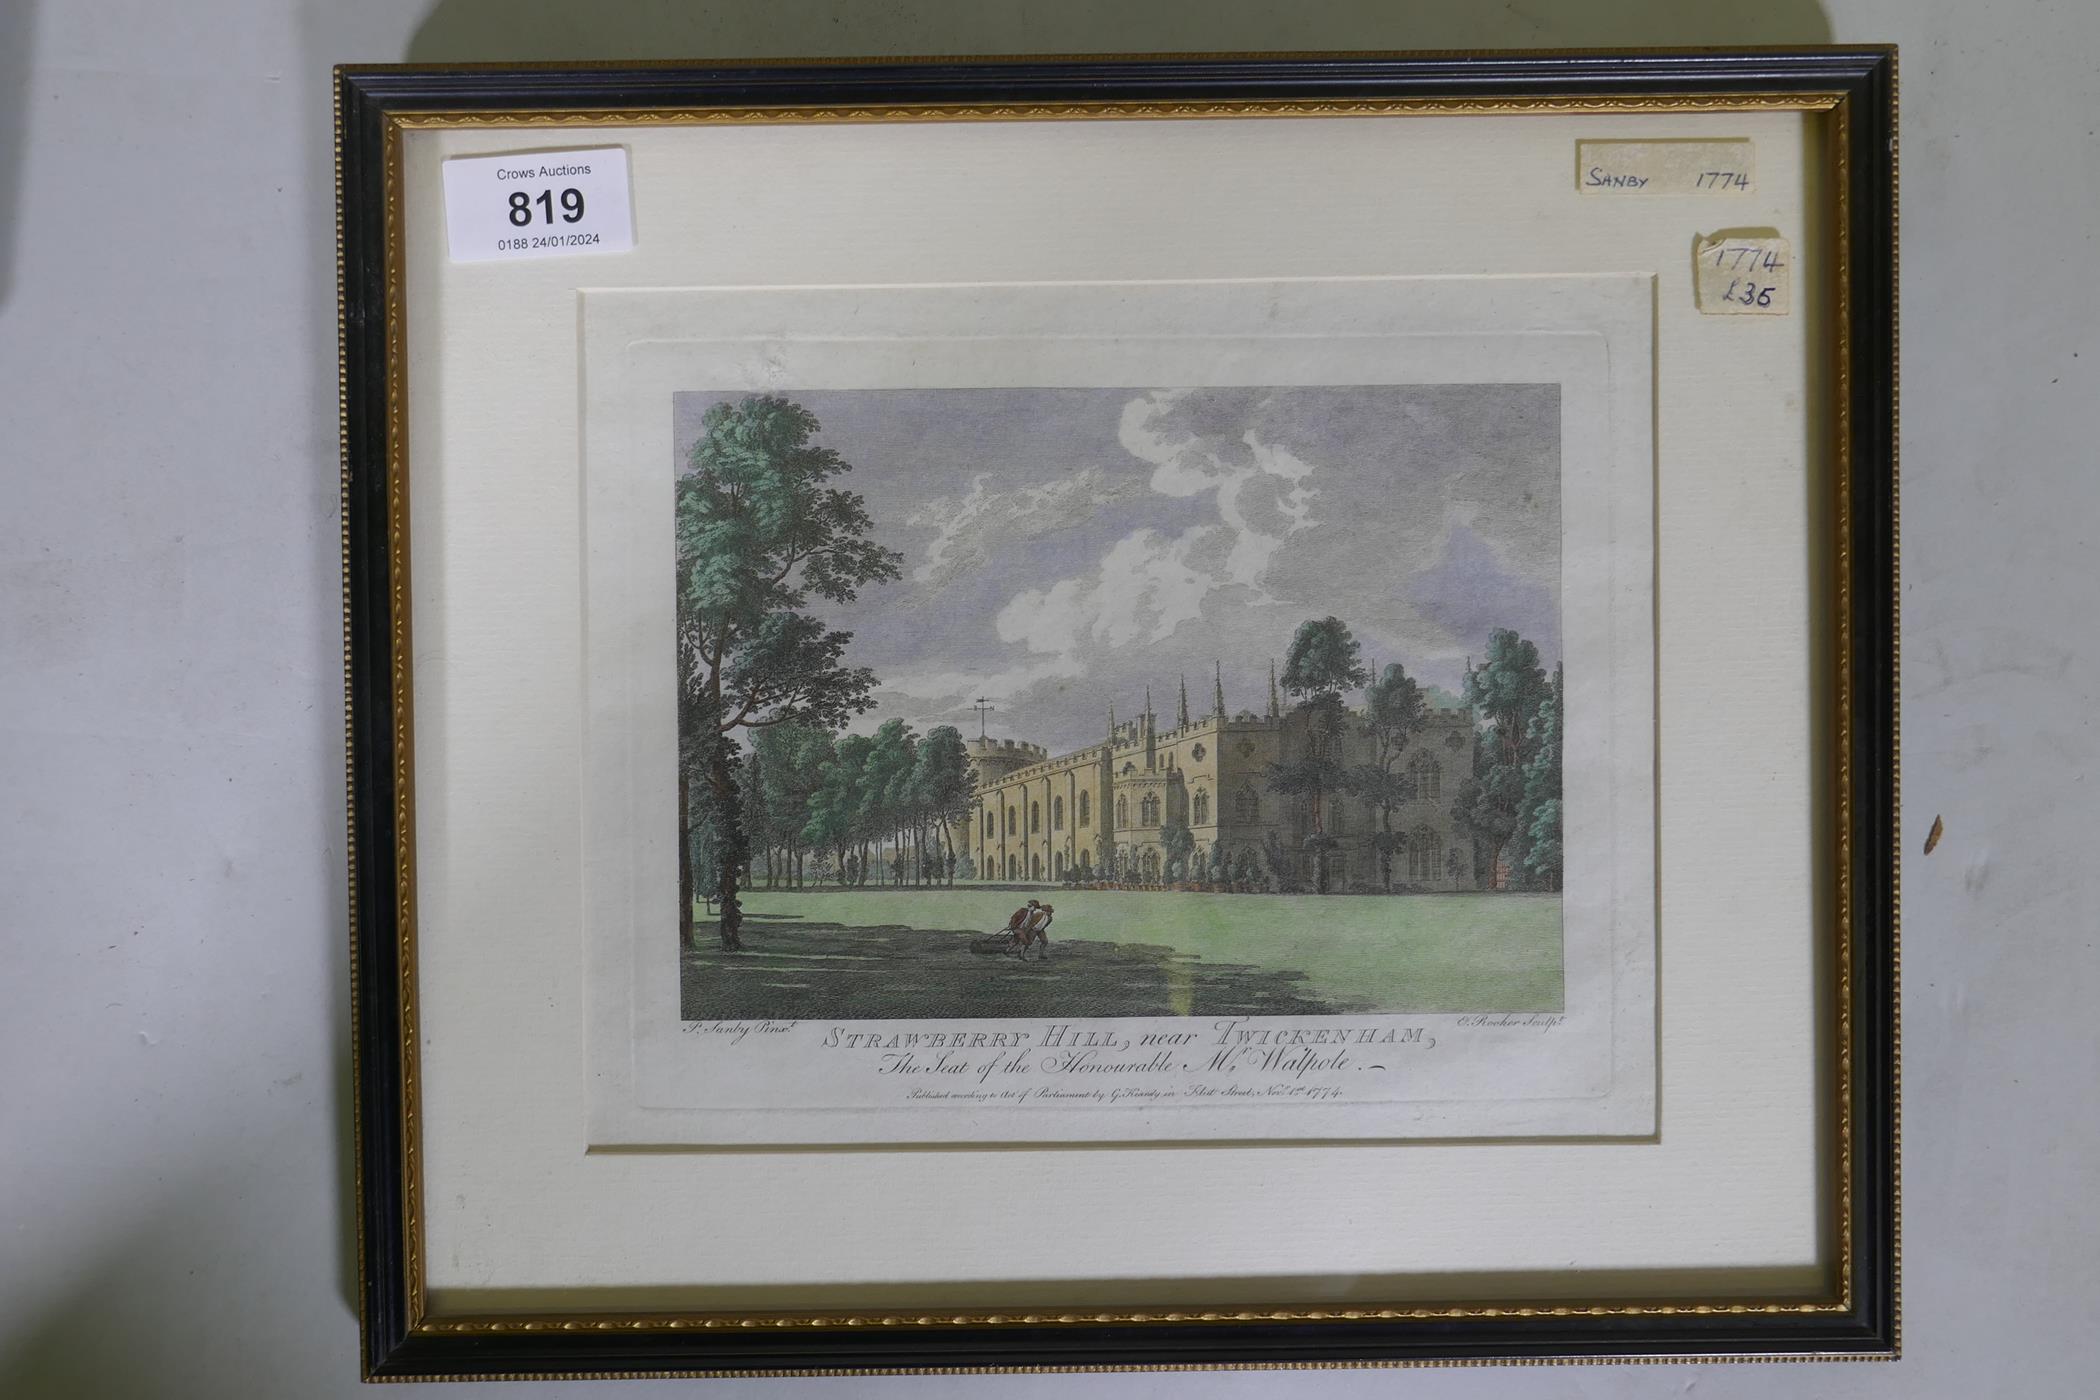 After Paul Sandby, Strawberry Hill, near Twickenham, the seat of the Honourable Mr. Walpole, - Image 3 of 3